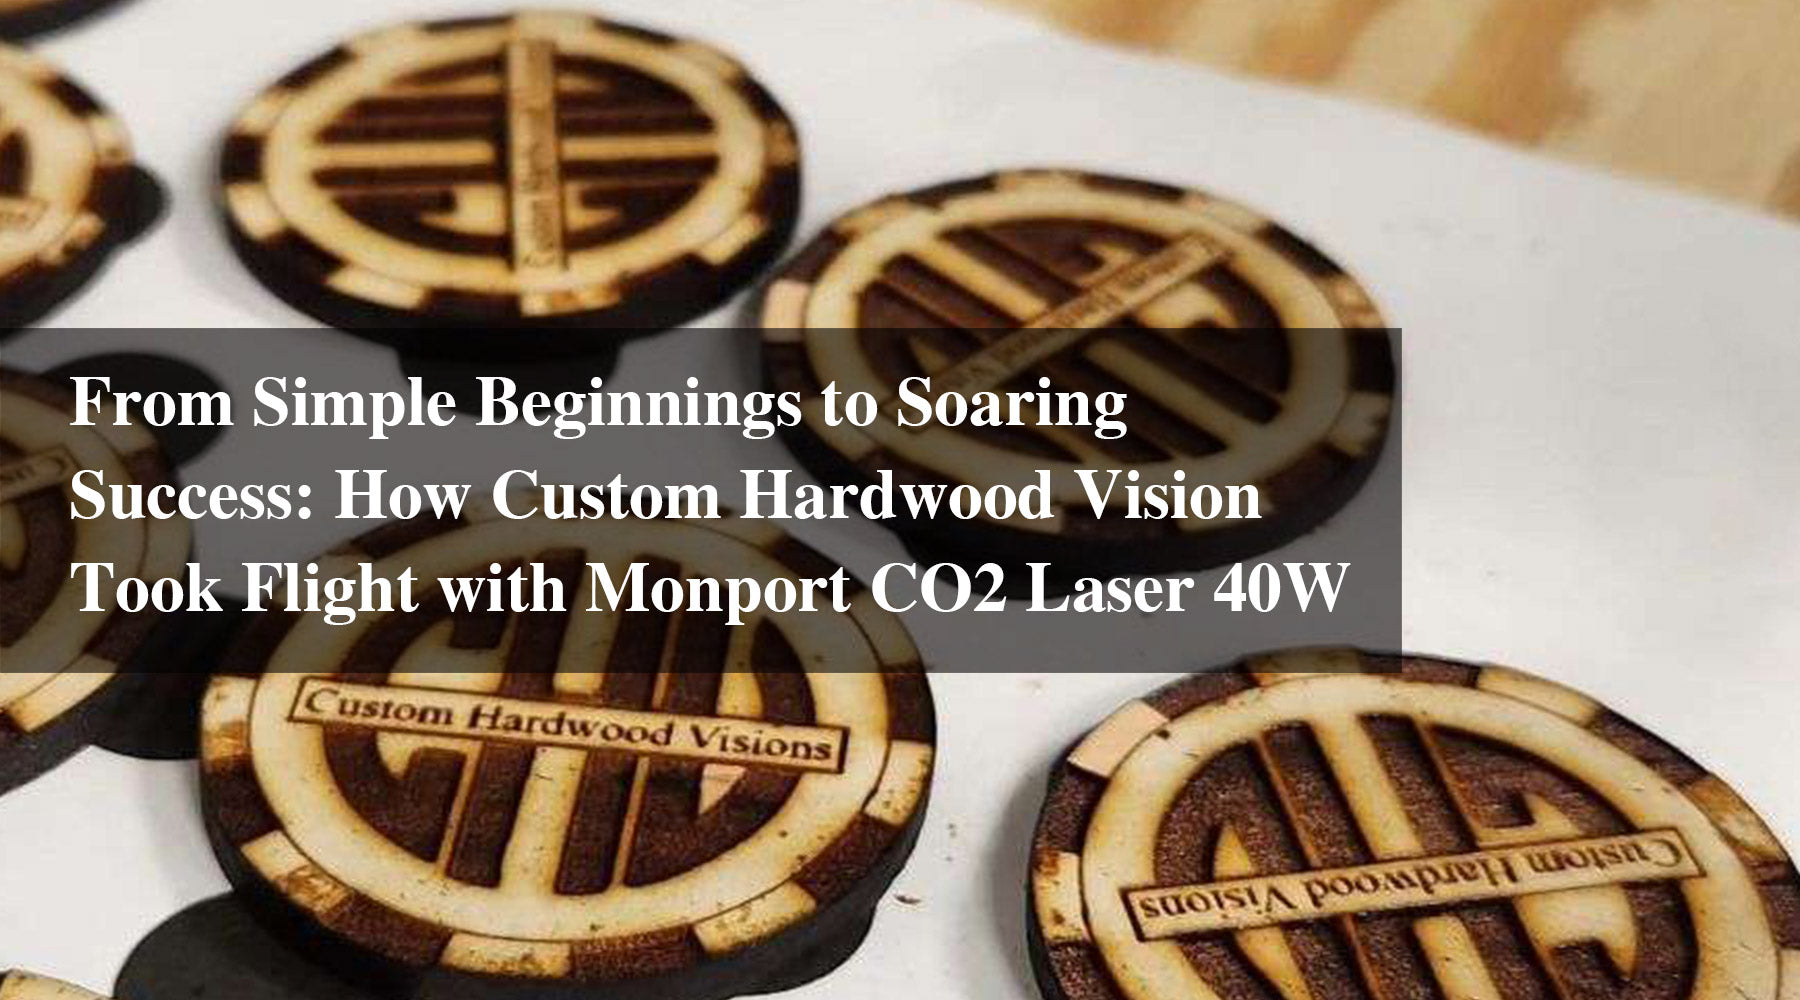 From Simple Beginnings to Soaring Success: How Custom Hardwood Visions Took Flight with Monport CO2 Laser 40W